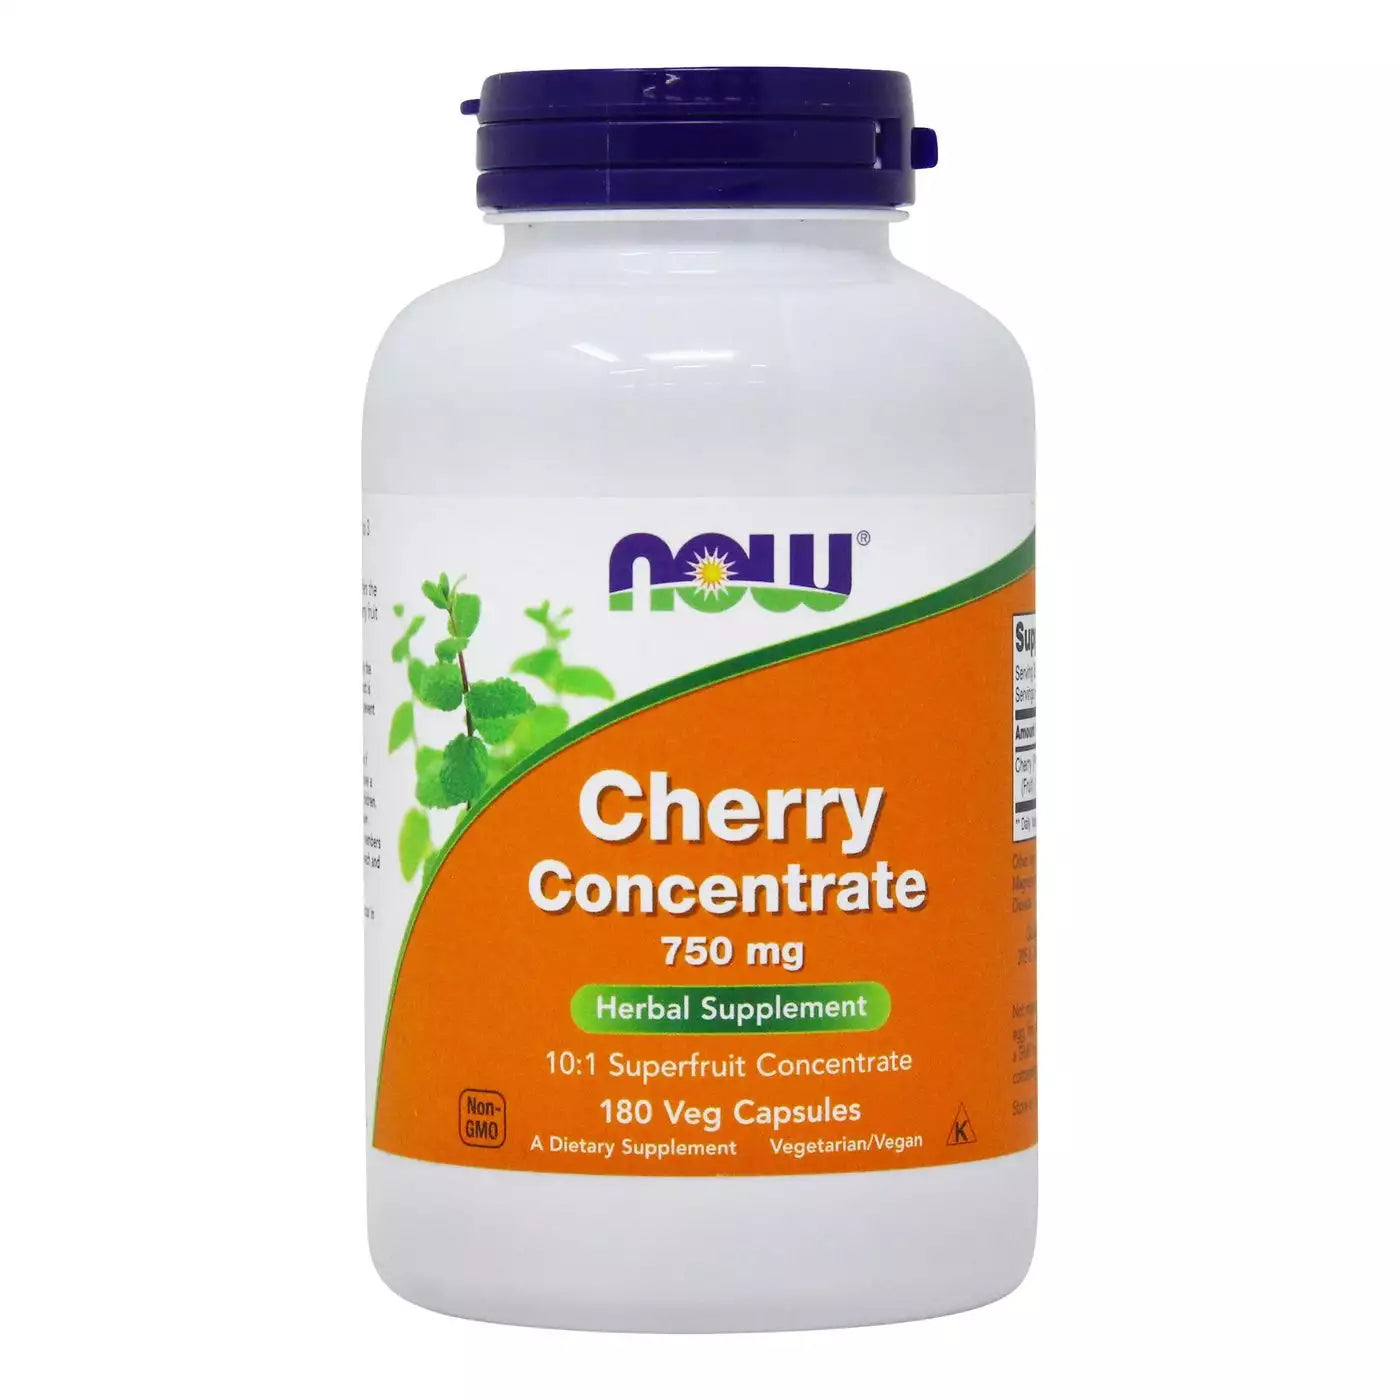 NOW CHERRY CONCENTRATE 750MG